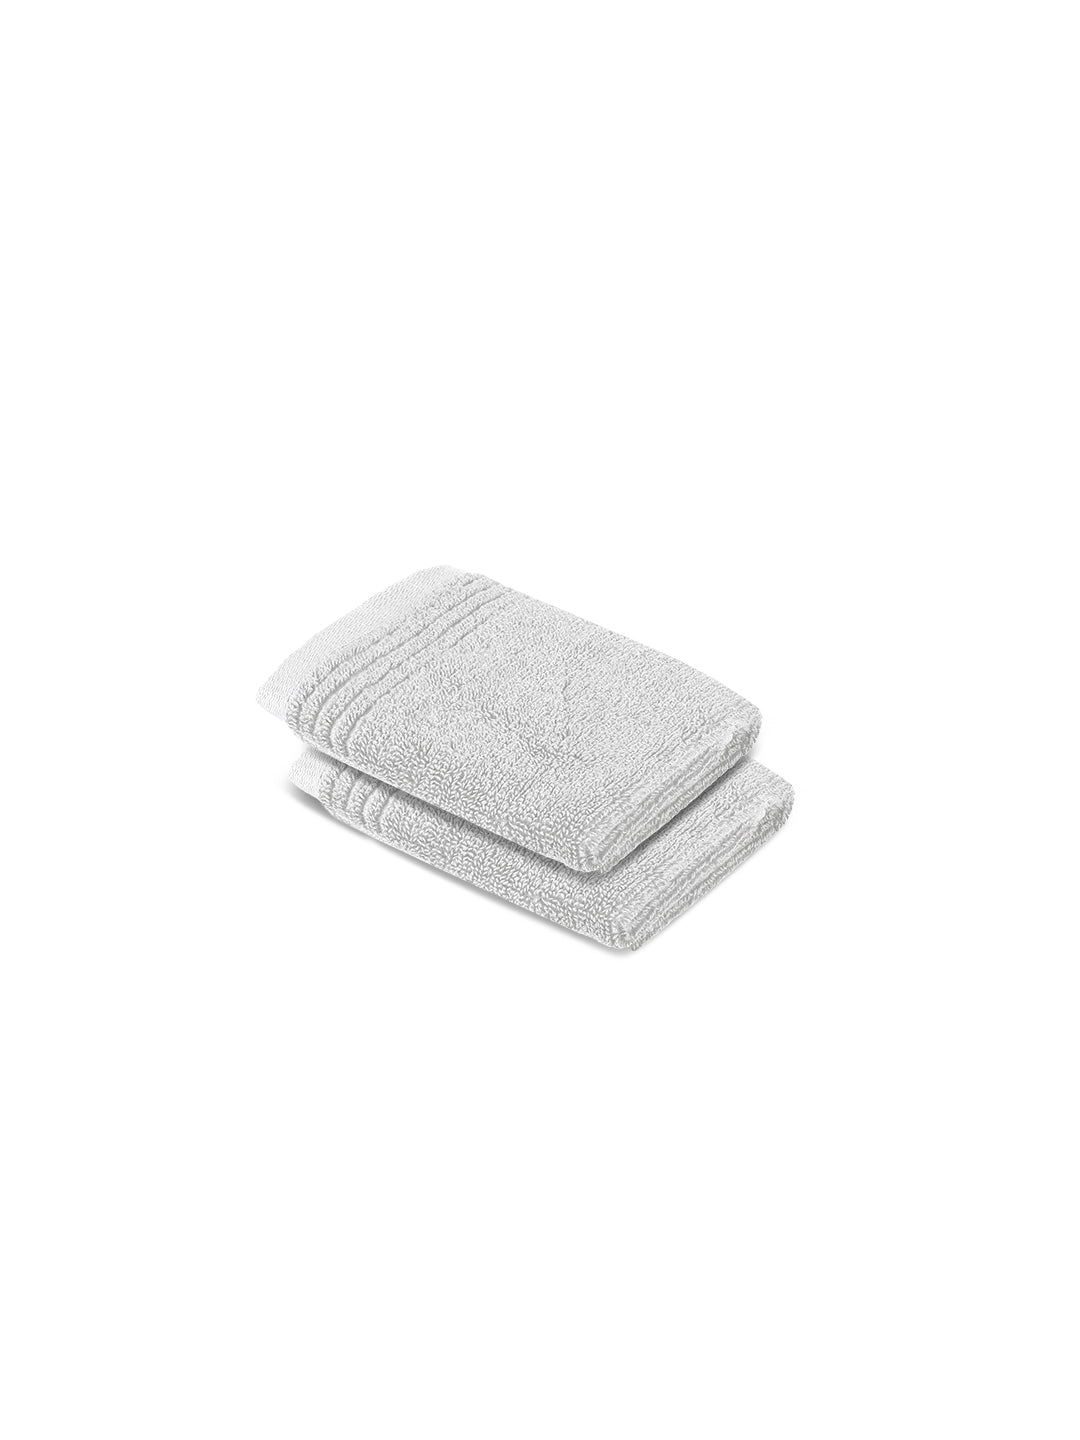 Gold Lush Spa Pack of 2 Face Towels